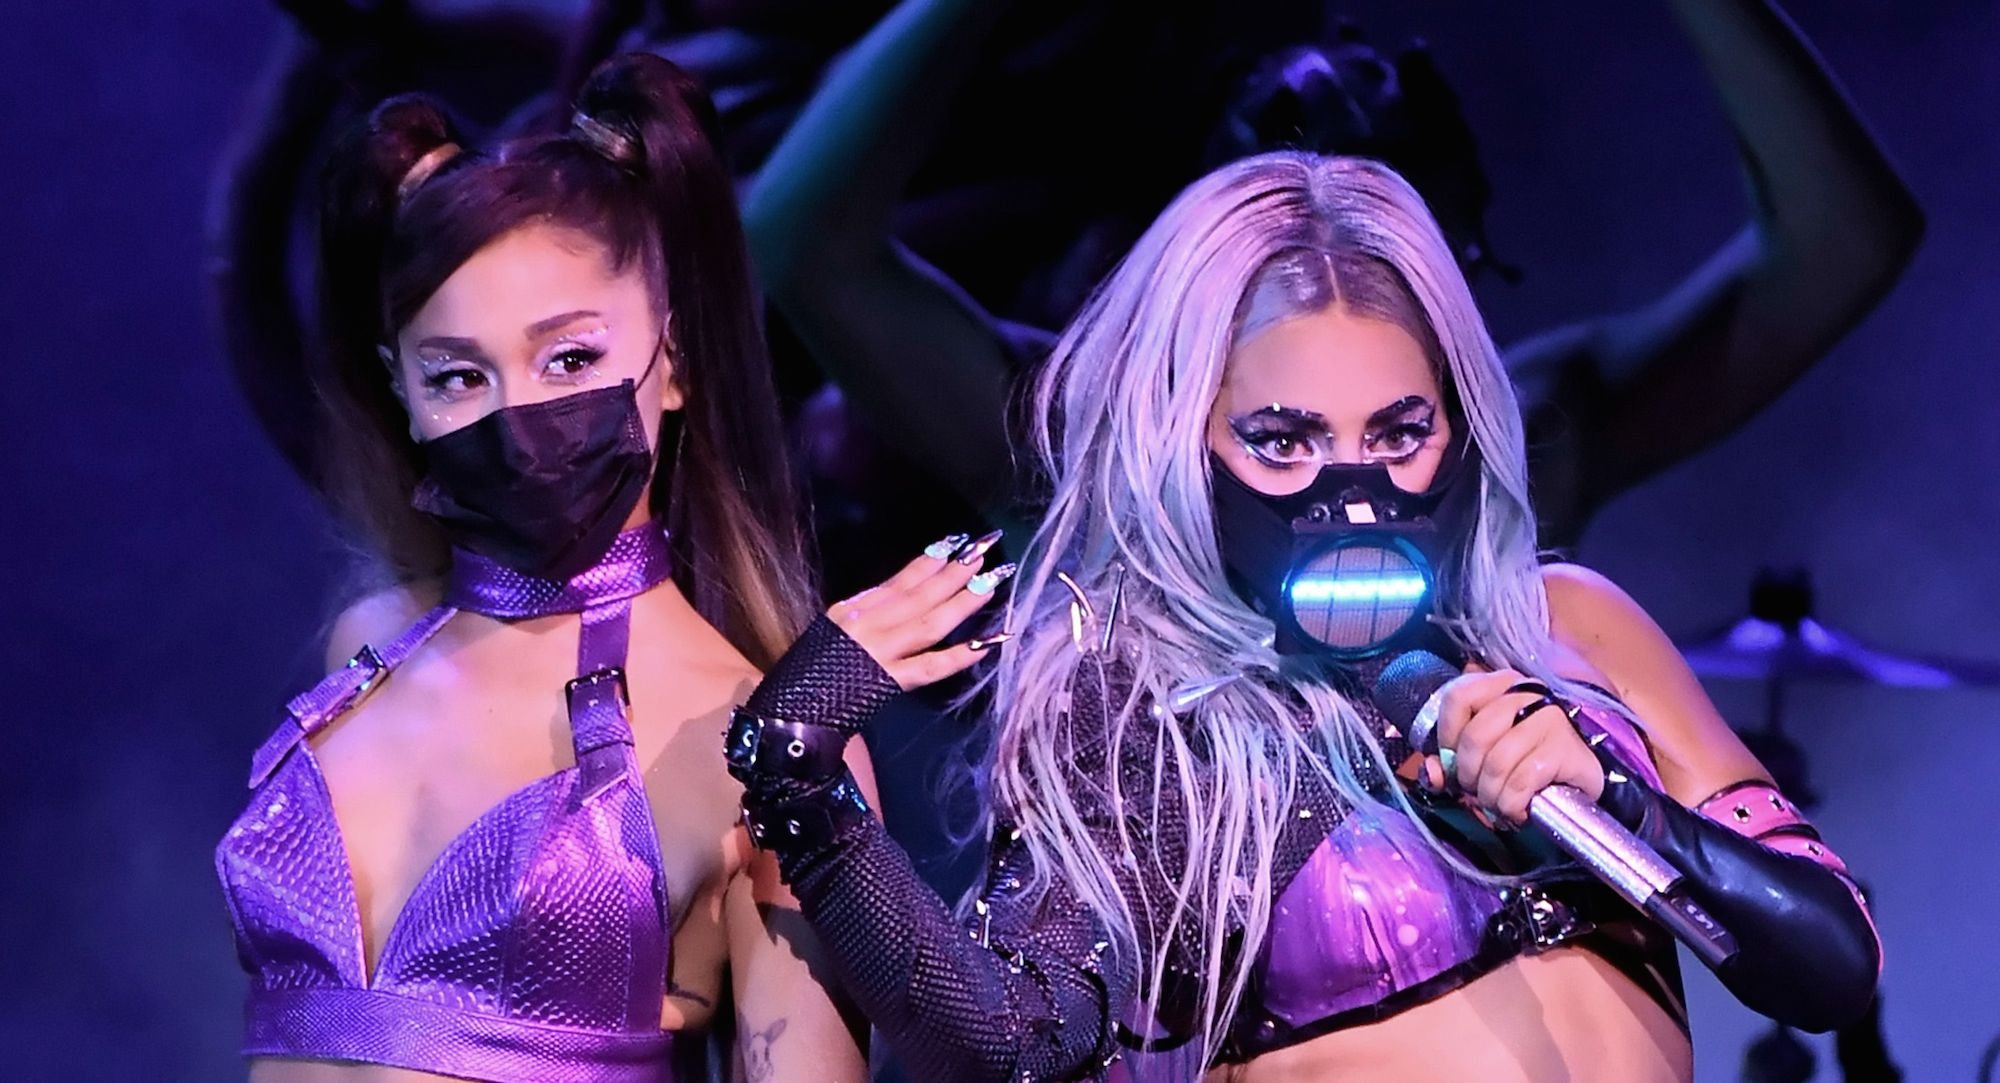 (L-R) Ariana Grande and Lady Gaga in masks on stage performing during the 2020 MTV Video Music Awards